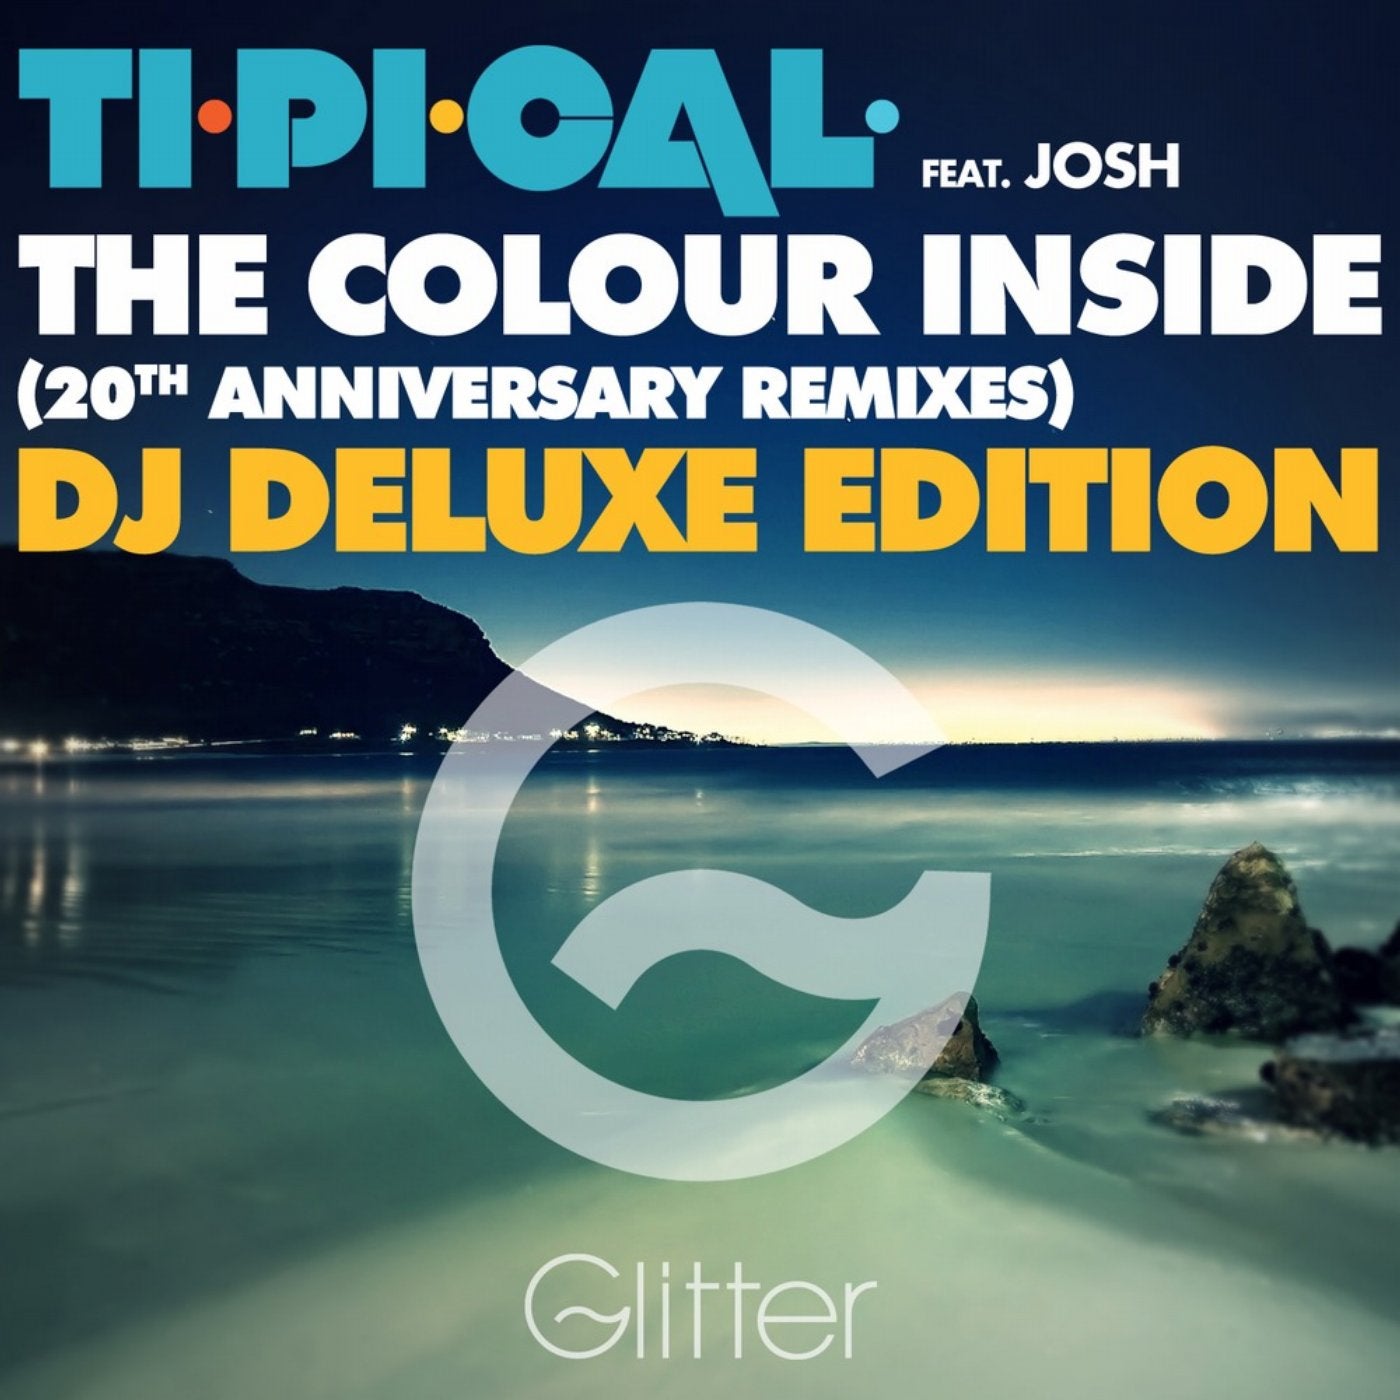 The Colour Inside (20Th Anniversary Remixes) - Dj Deluxe Edition